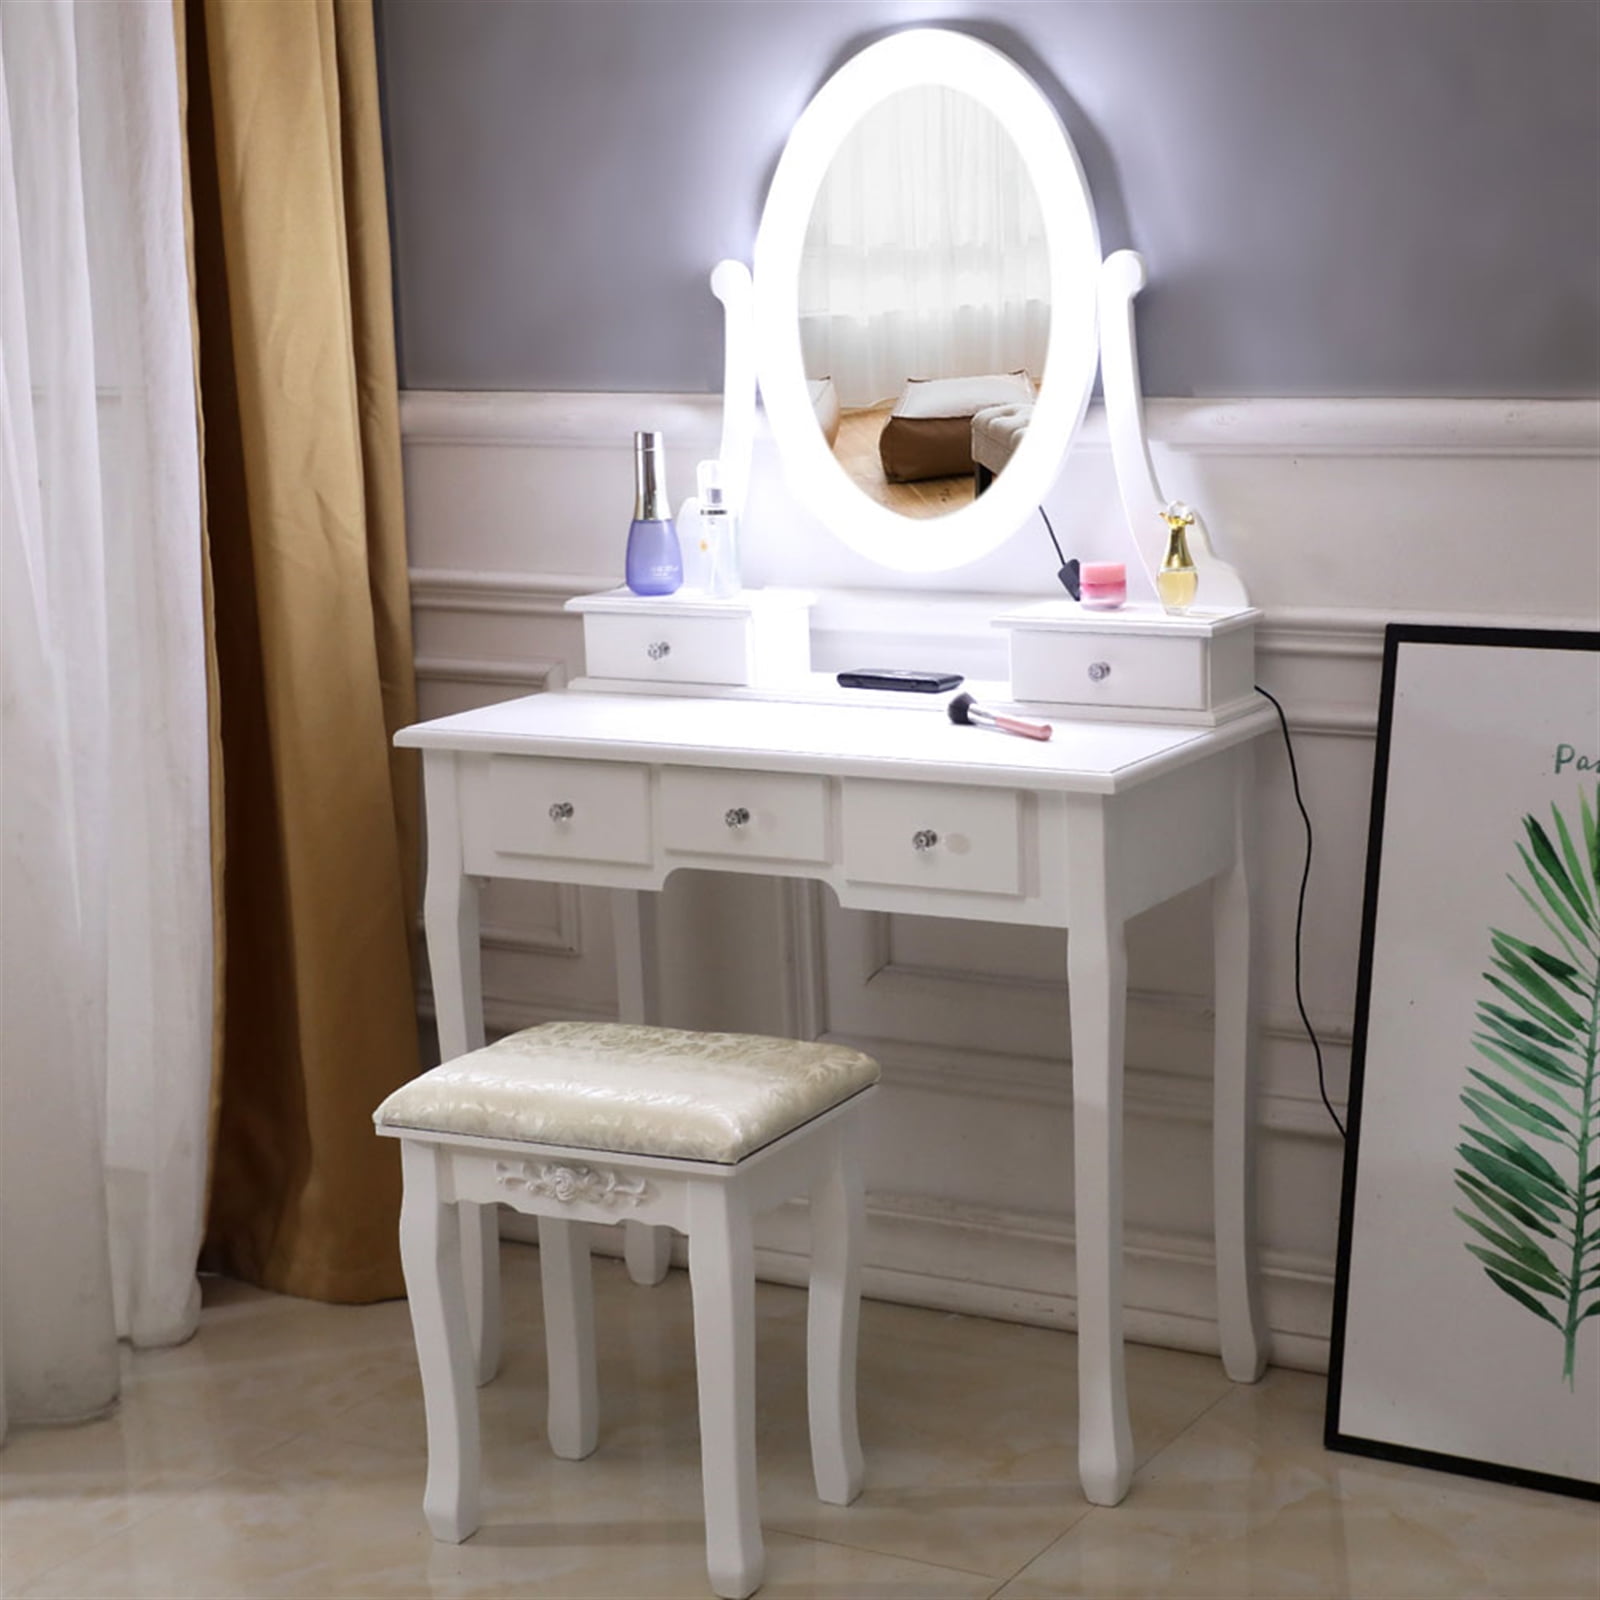 Tophomer Lighted Vanity Table Led, Bedroom Vanity With Lights Ikea